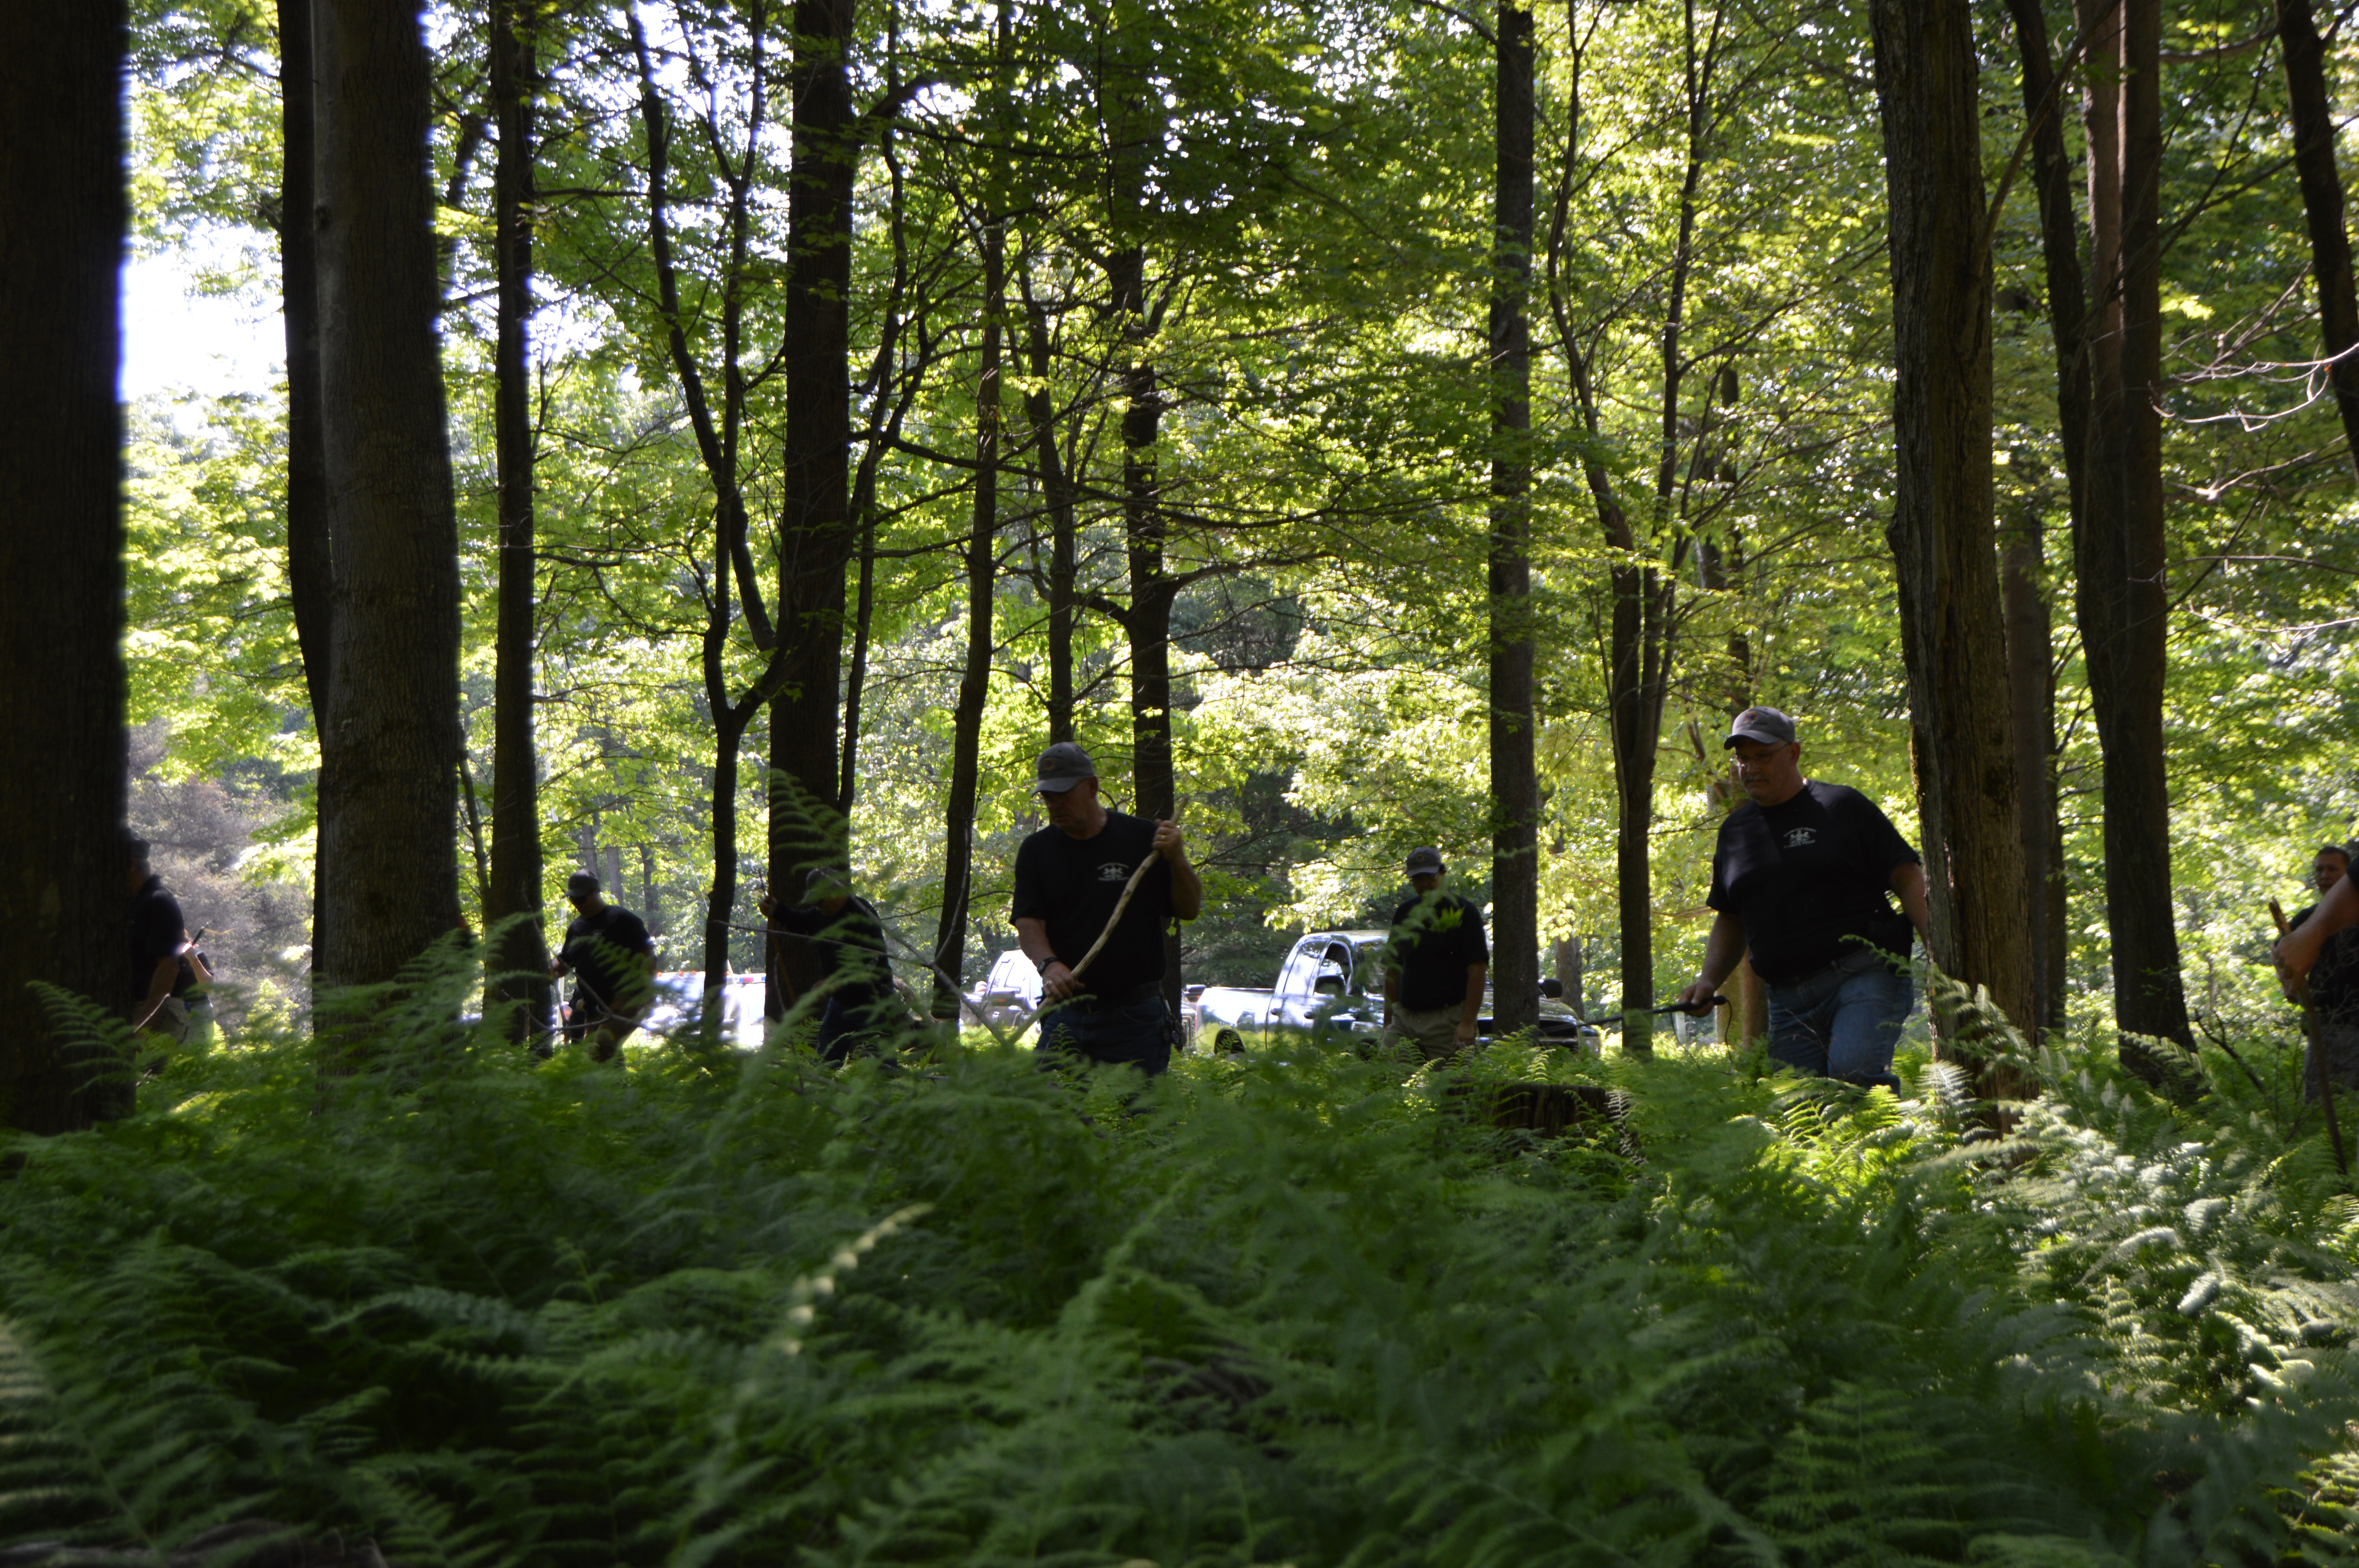 Members of the Clearfield County Sheriff's Posse comb the woods near the Greenwood Club during a mock training exercise. The Posse members were searching for a missing 7-year-old girl who had wandered away during a family outing. The girl was located within 30 minutes of the start of the search about three-tenths of a mile into the woods. (Photo by Kimberly Finnigan)